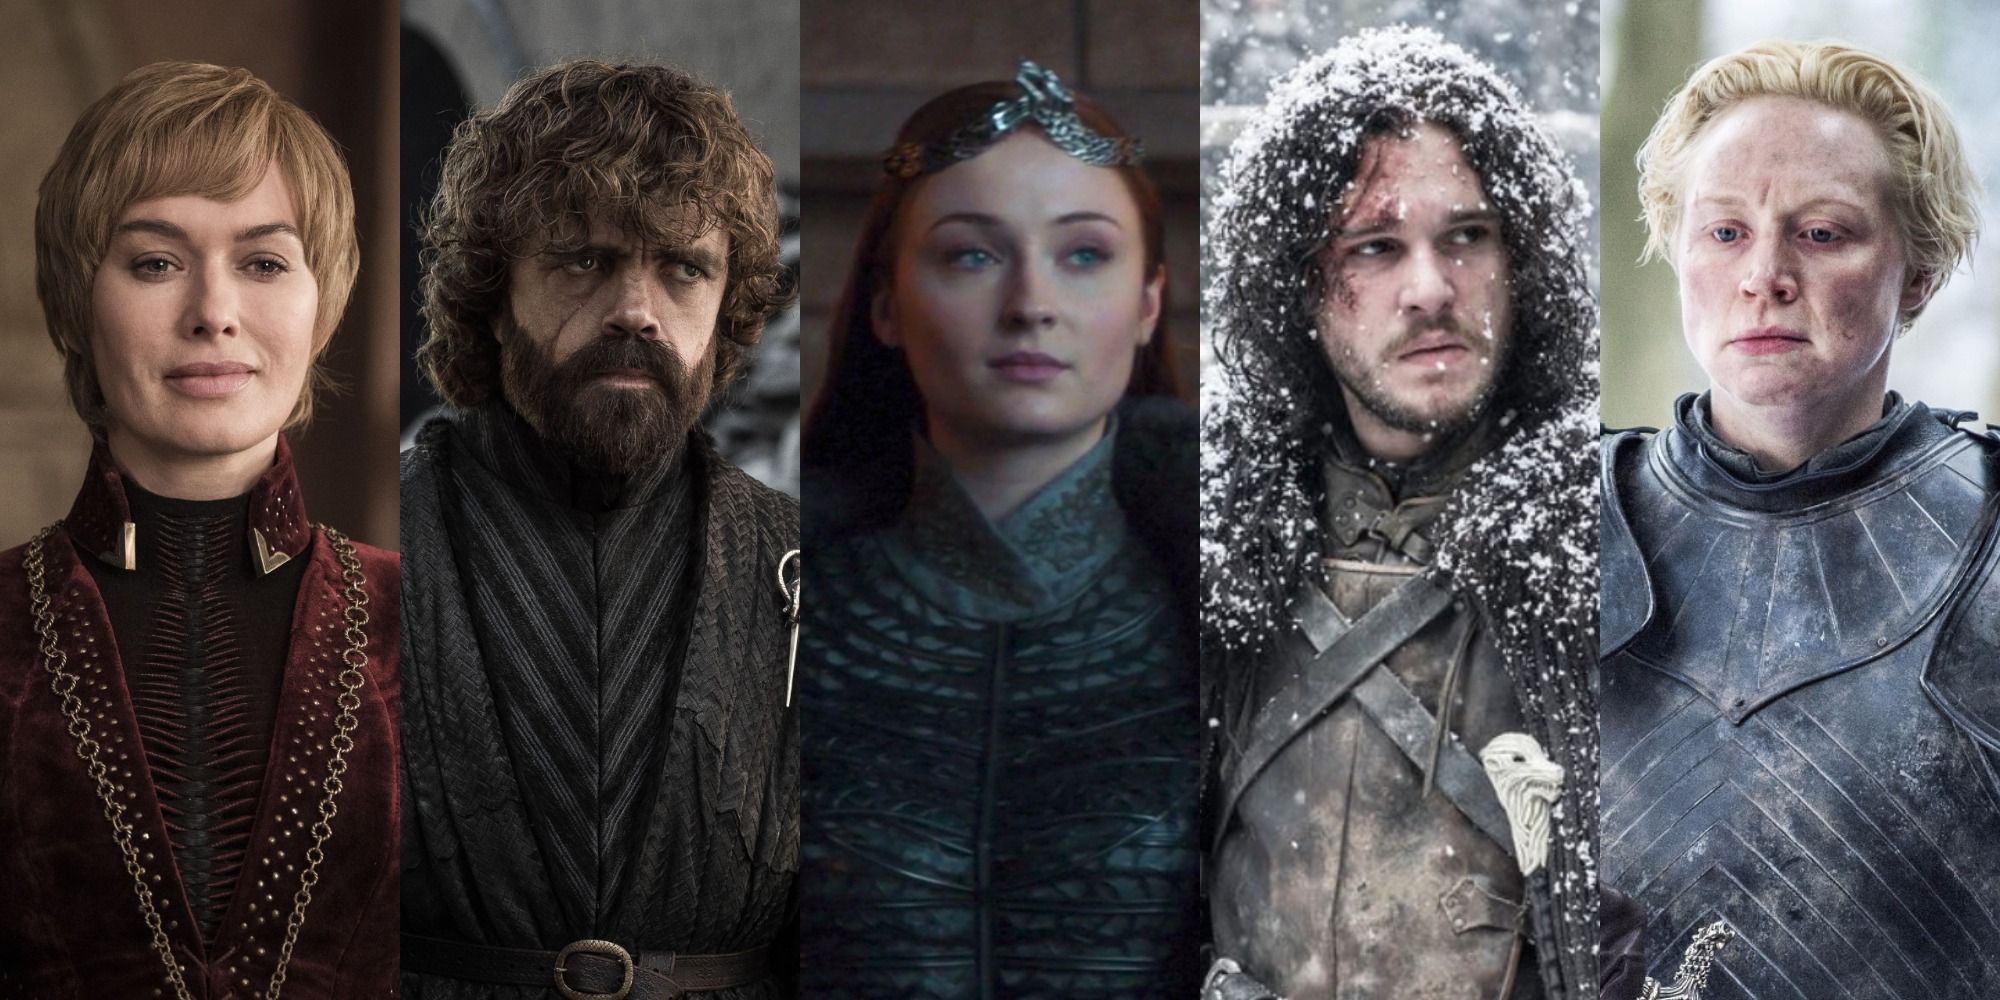 Who is the most loved character in Game of Thrones?